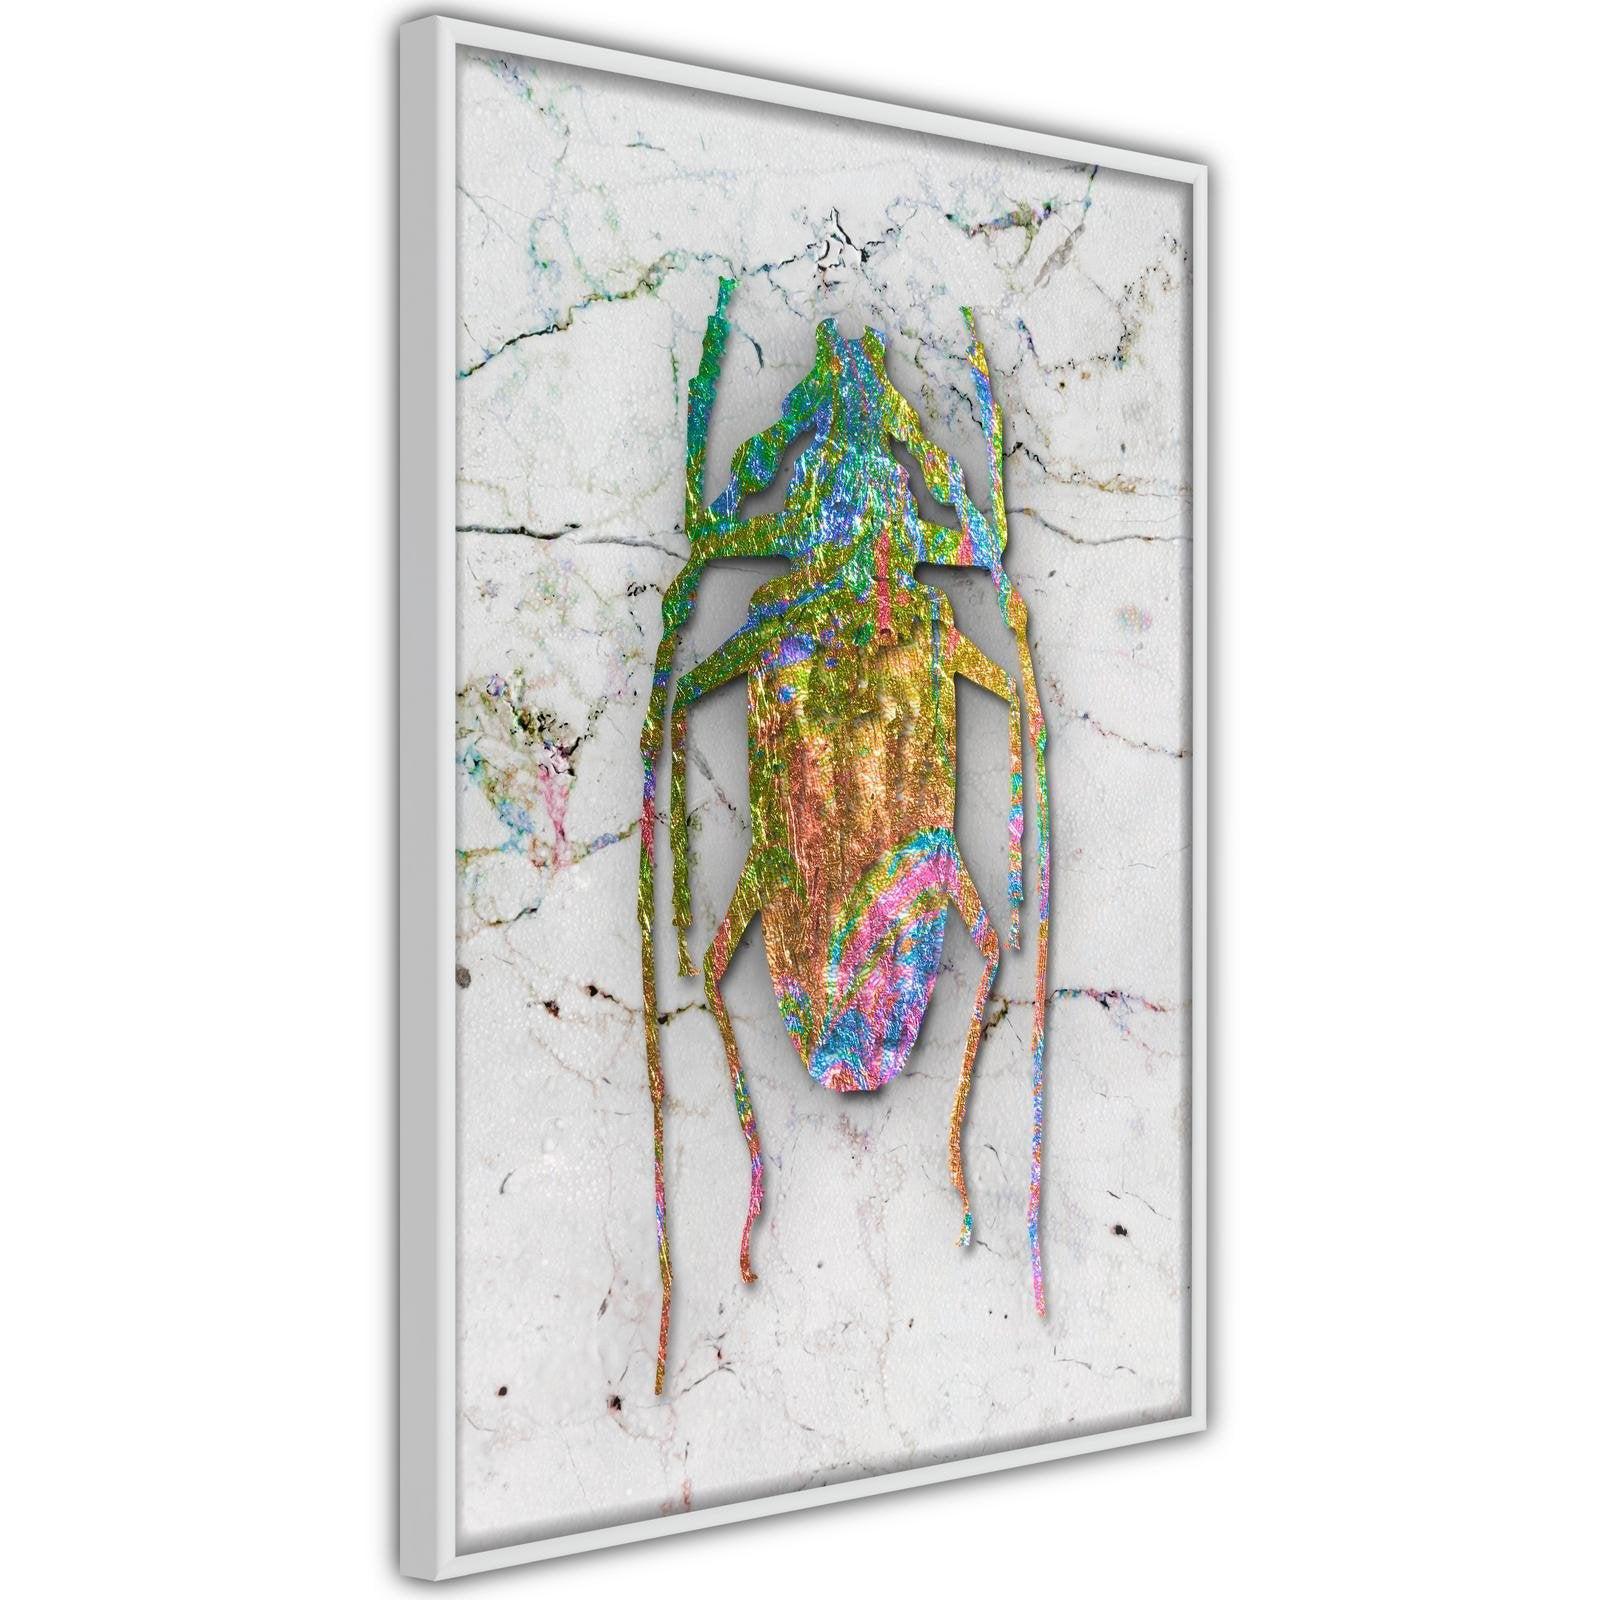 Inramad Poster / Tavla - Iridescent Insect-Poster Inramad-Artgeist-peaceofhome.se